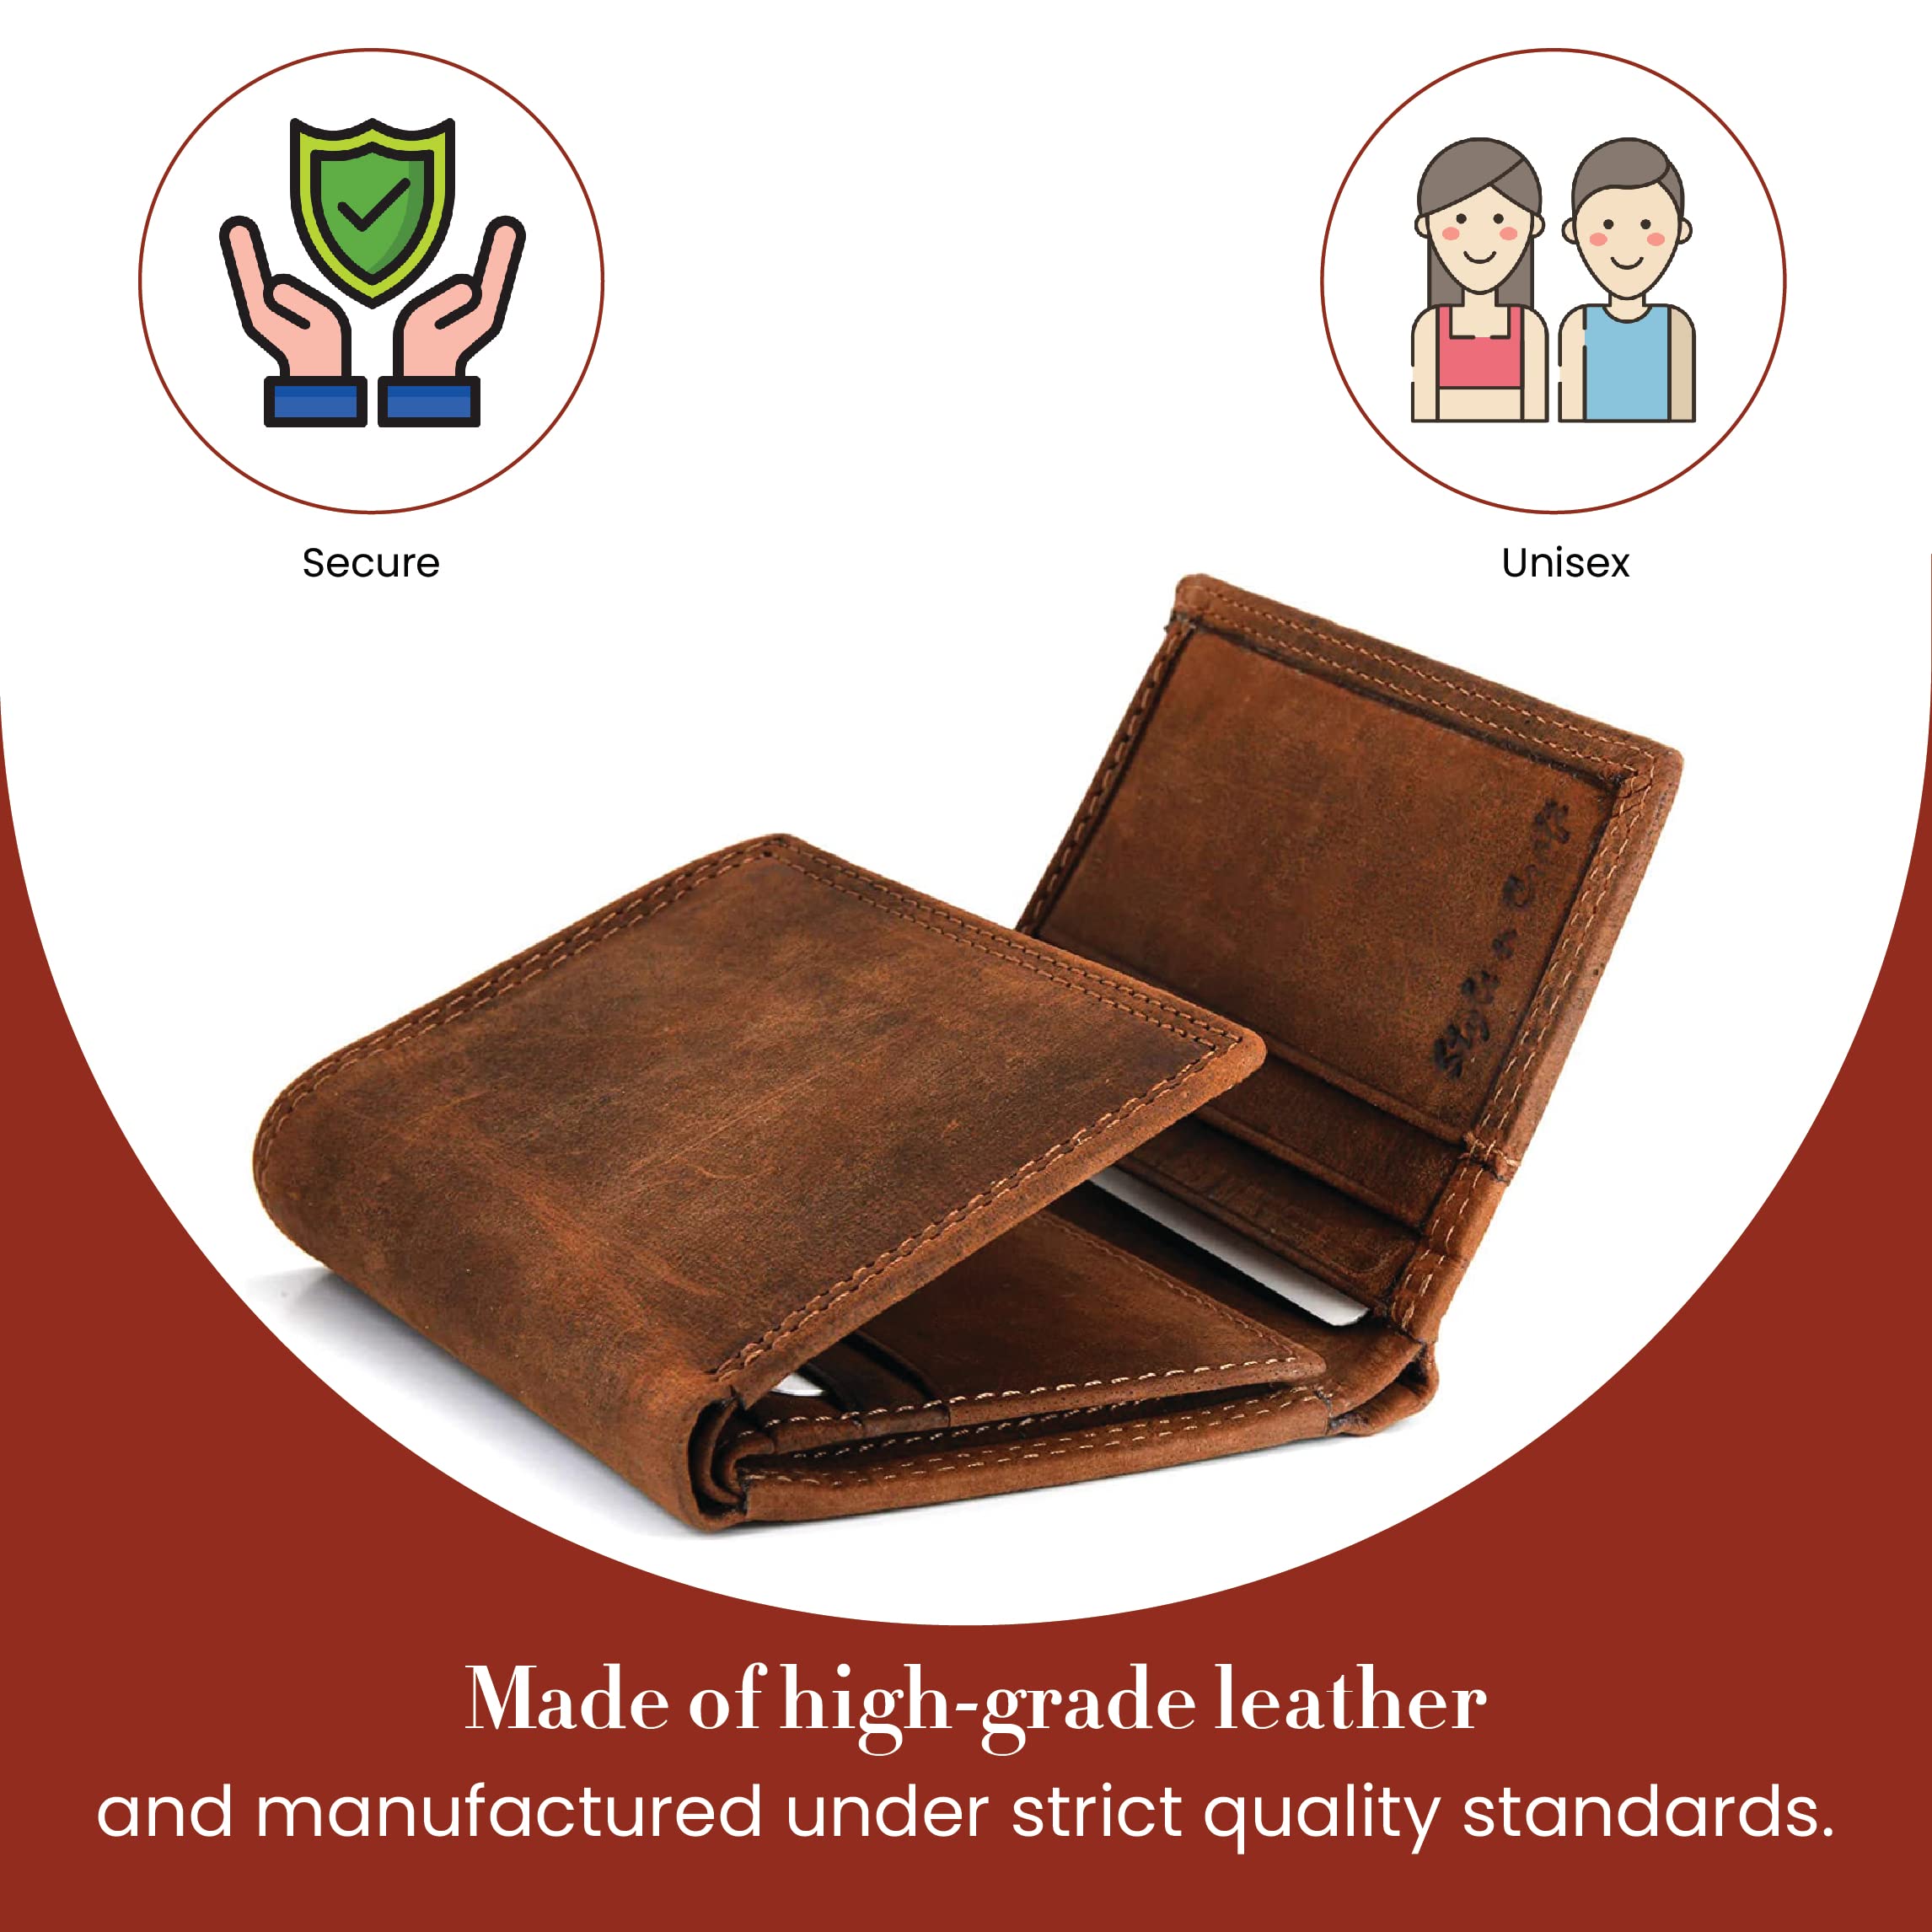 Style n Craft Trifold Leather Wallet, Full-Grain Leather Wallet for Men and Women, RFID-Protected Wallet with Multiple Card Holders, 2 Tone Vintage Effect, Brown (300790-BR)